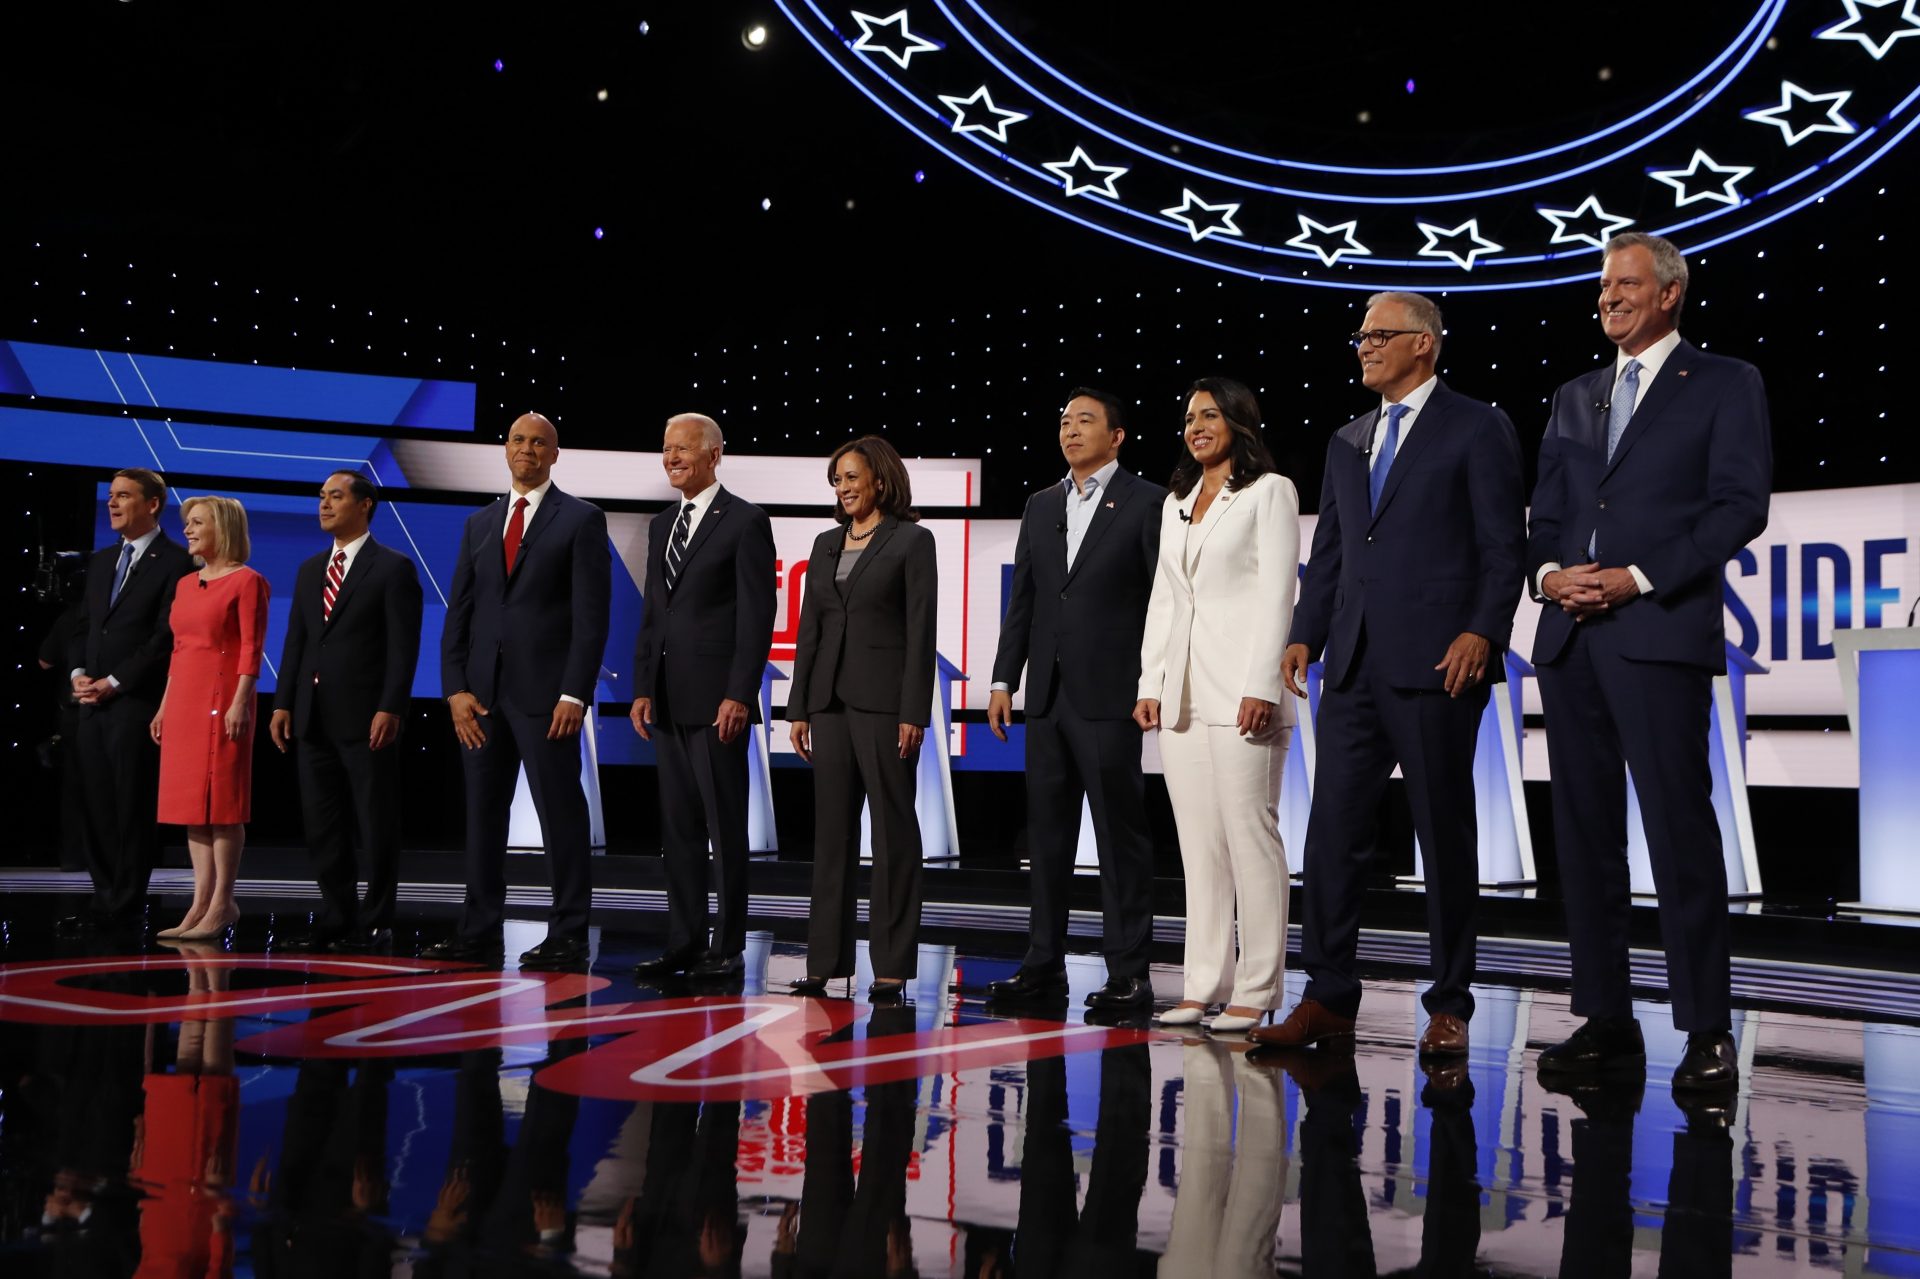 From left, Sen. Michael Bennet, D-Colo., Sen. Kirsten Gillibrand, D-N.Y., former Housing and Urban Development Secretary Julian Castro, Sen. Cory Booker, D-N.J., former Vice President Joe Biden, Sen. Kamala Harris, D-Calif., Andrew Yang, Rep. Tulsi Gabbard, D-Hawaii, Washington Gov. Jay Inslee and New York City Mayor Bill de Blasio are introduced before the second of two Democratic presidential primary debates hosted by CNN Wednesday, July 31, 2019, in the Fox Theatre in Detroit.